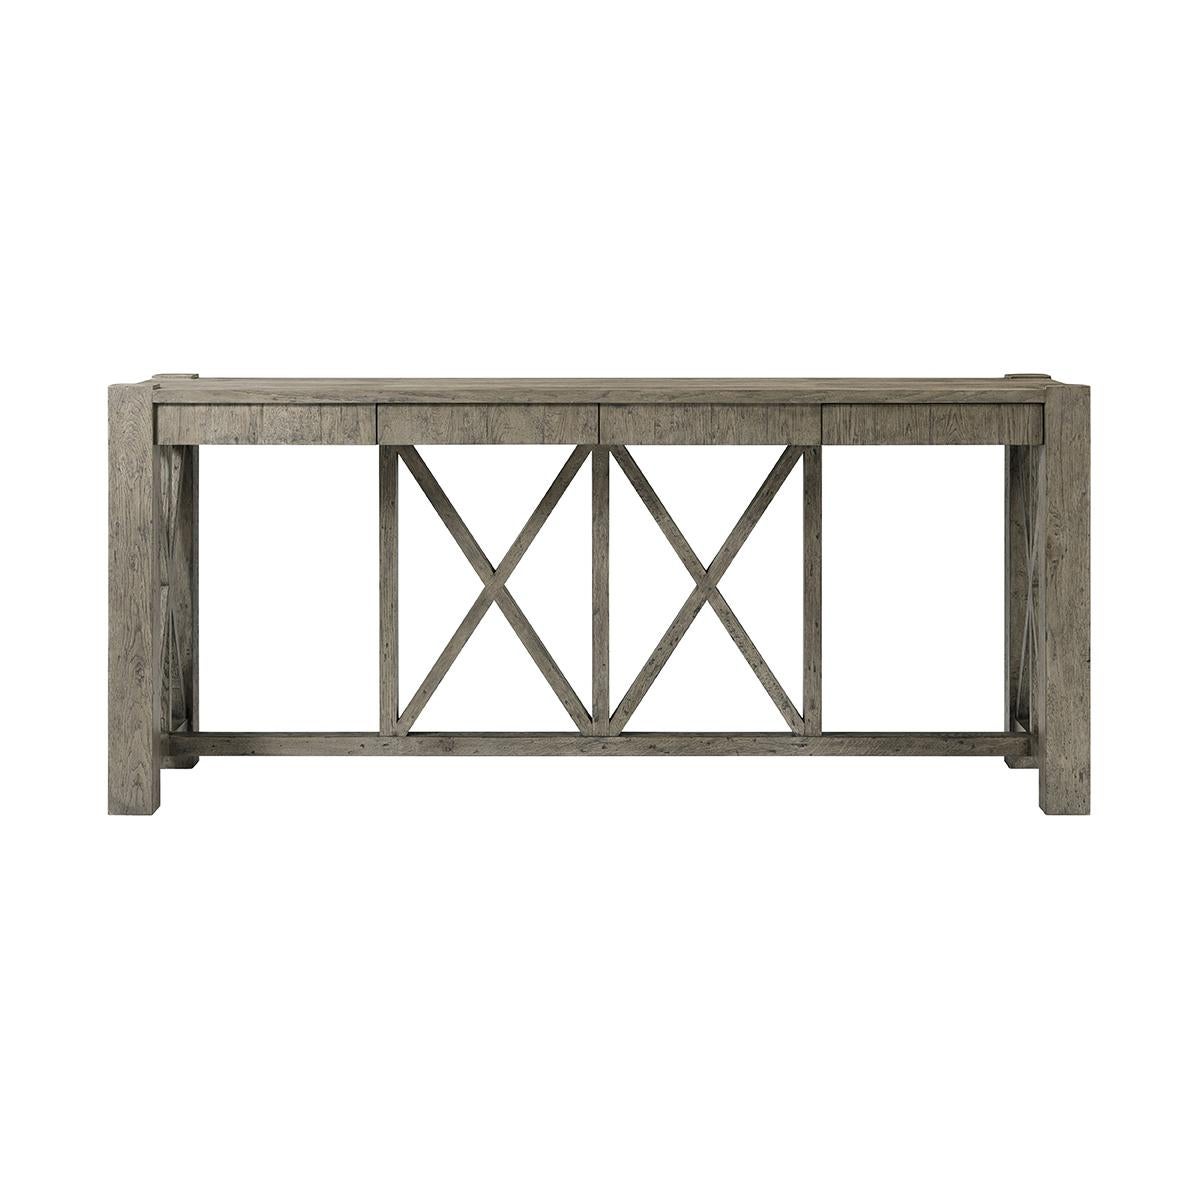 Featuring a planked oak top finished in a greyed echo oak, this console table is lightly distressed to enhance its warm, inviting look. It provides a generous surface area that is perfect for displaying decorative items, books, or even serving